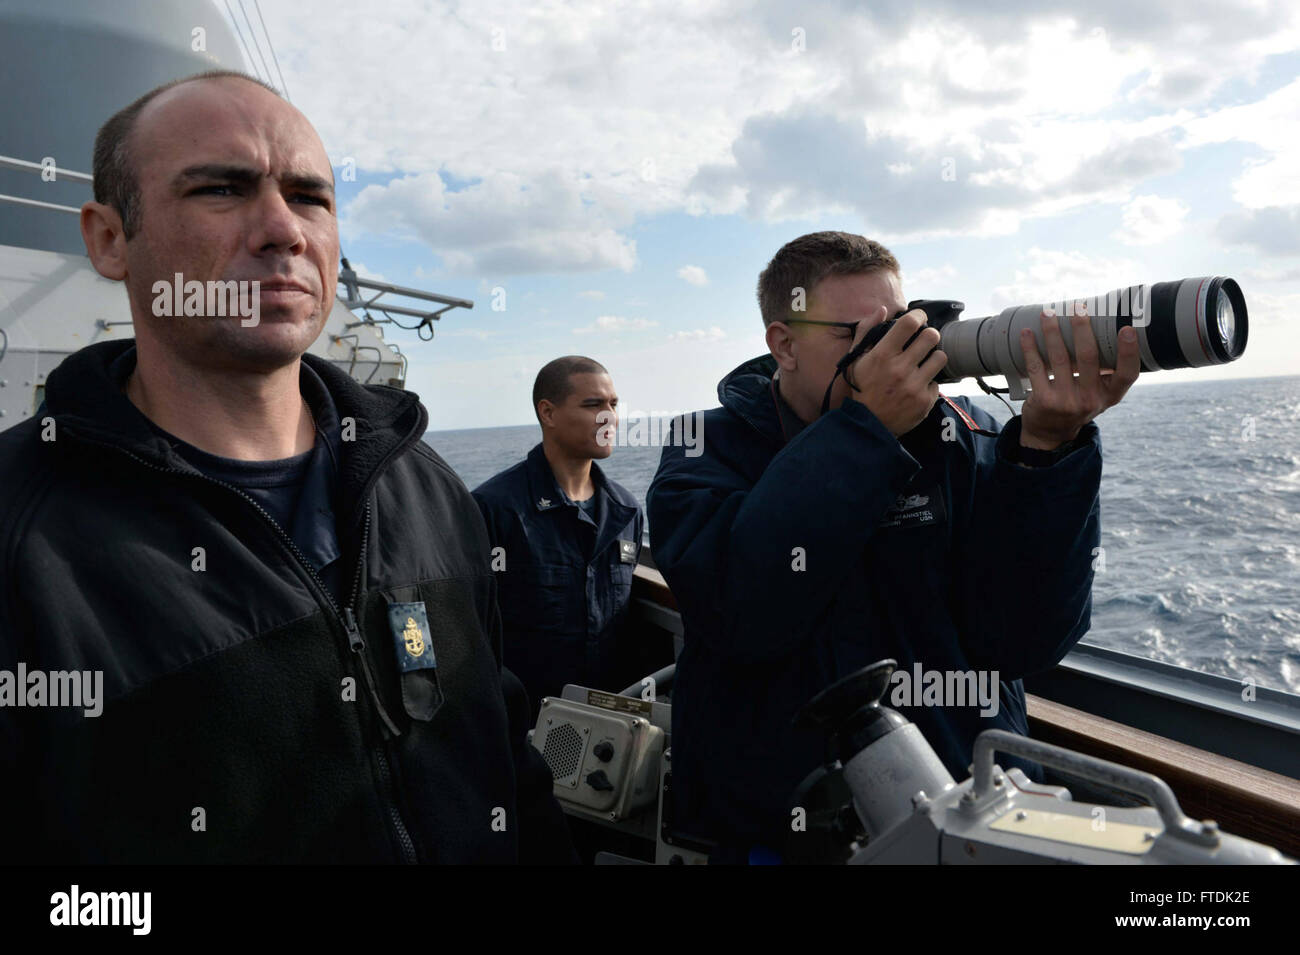 151231-N-XT273-017 MEDITERRANEAN SEA (Dec. 31, 2015) Ship's Nautical or Otherwise Photographic Interpretation and Examination team Sailors photograph a contact from the port bridgewing aboard USS Ross (DDG 71) in the Mediterranean Sea Dec. 31, 2015. Ross, an Arleigh Burke-class guided-missile destroyer, forward deployed to Rota, Spain, is conducting a routine patrol in the U.S. 6th Fleet area of operations in support of U.S. national security interests in Europe. (U.S. Navy photo by Mass Communication Specialist 2nd Class Justin Stumberg/Released) Stock Photo